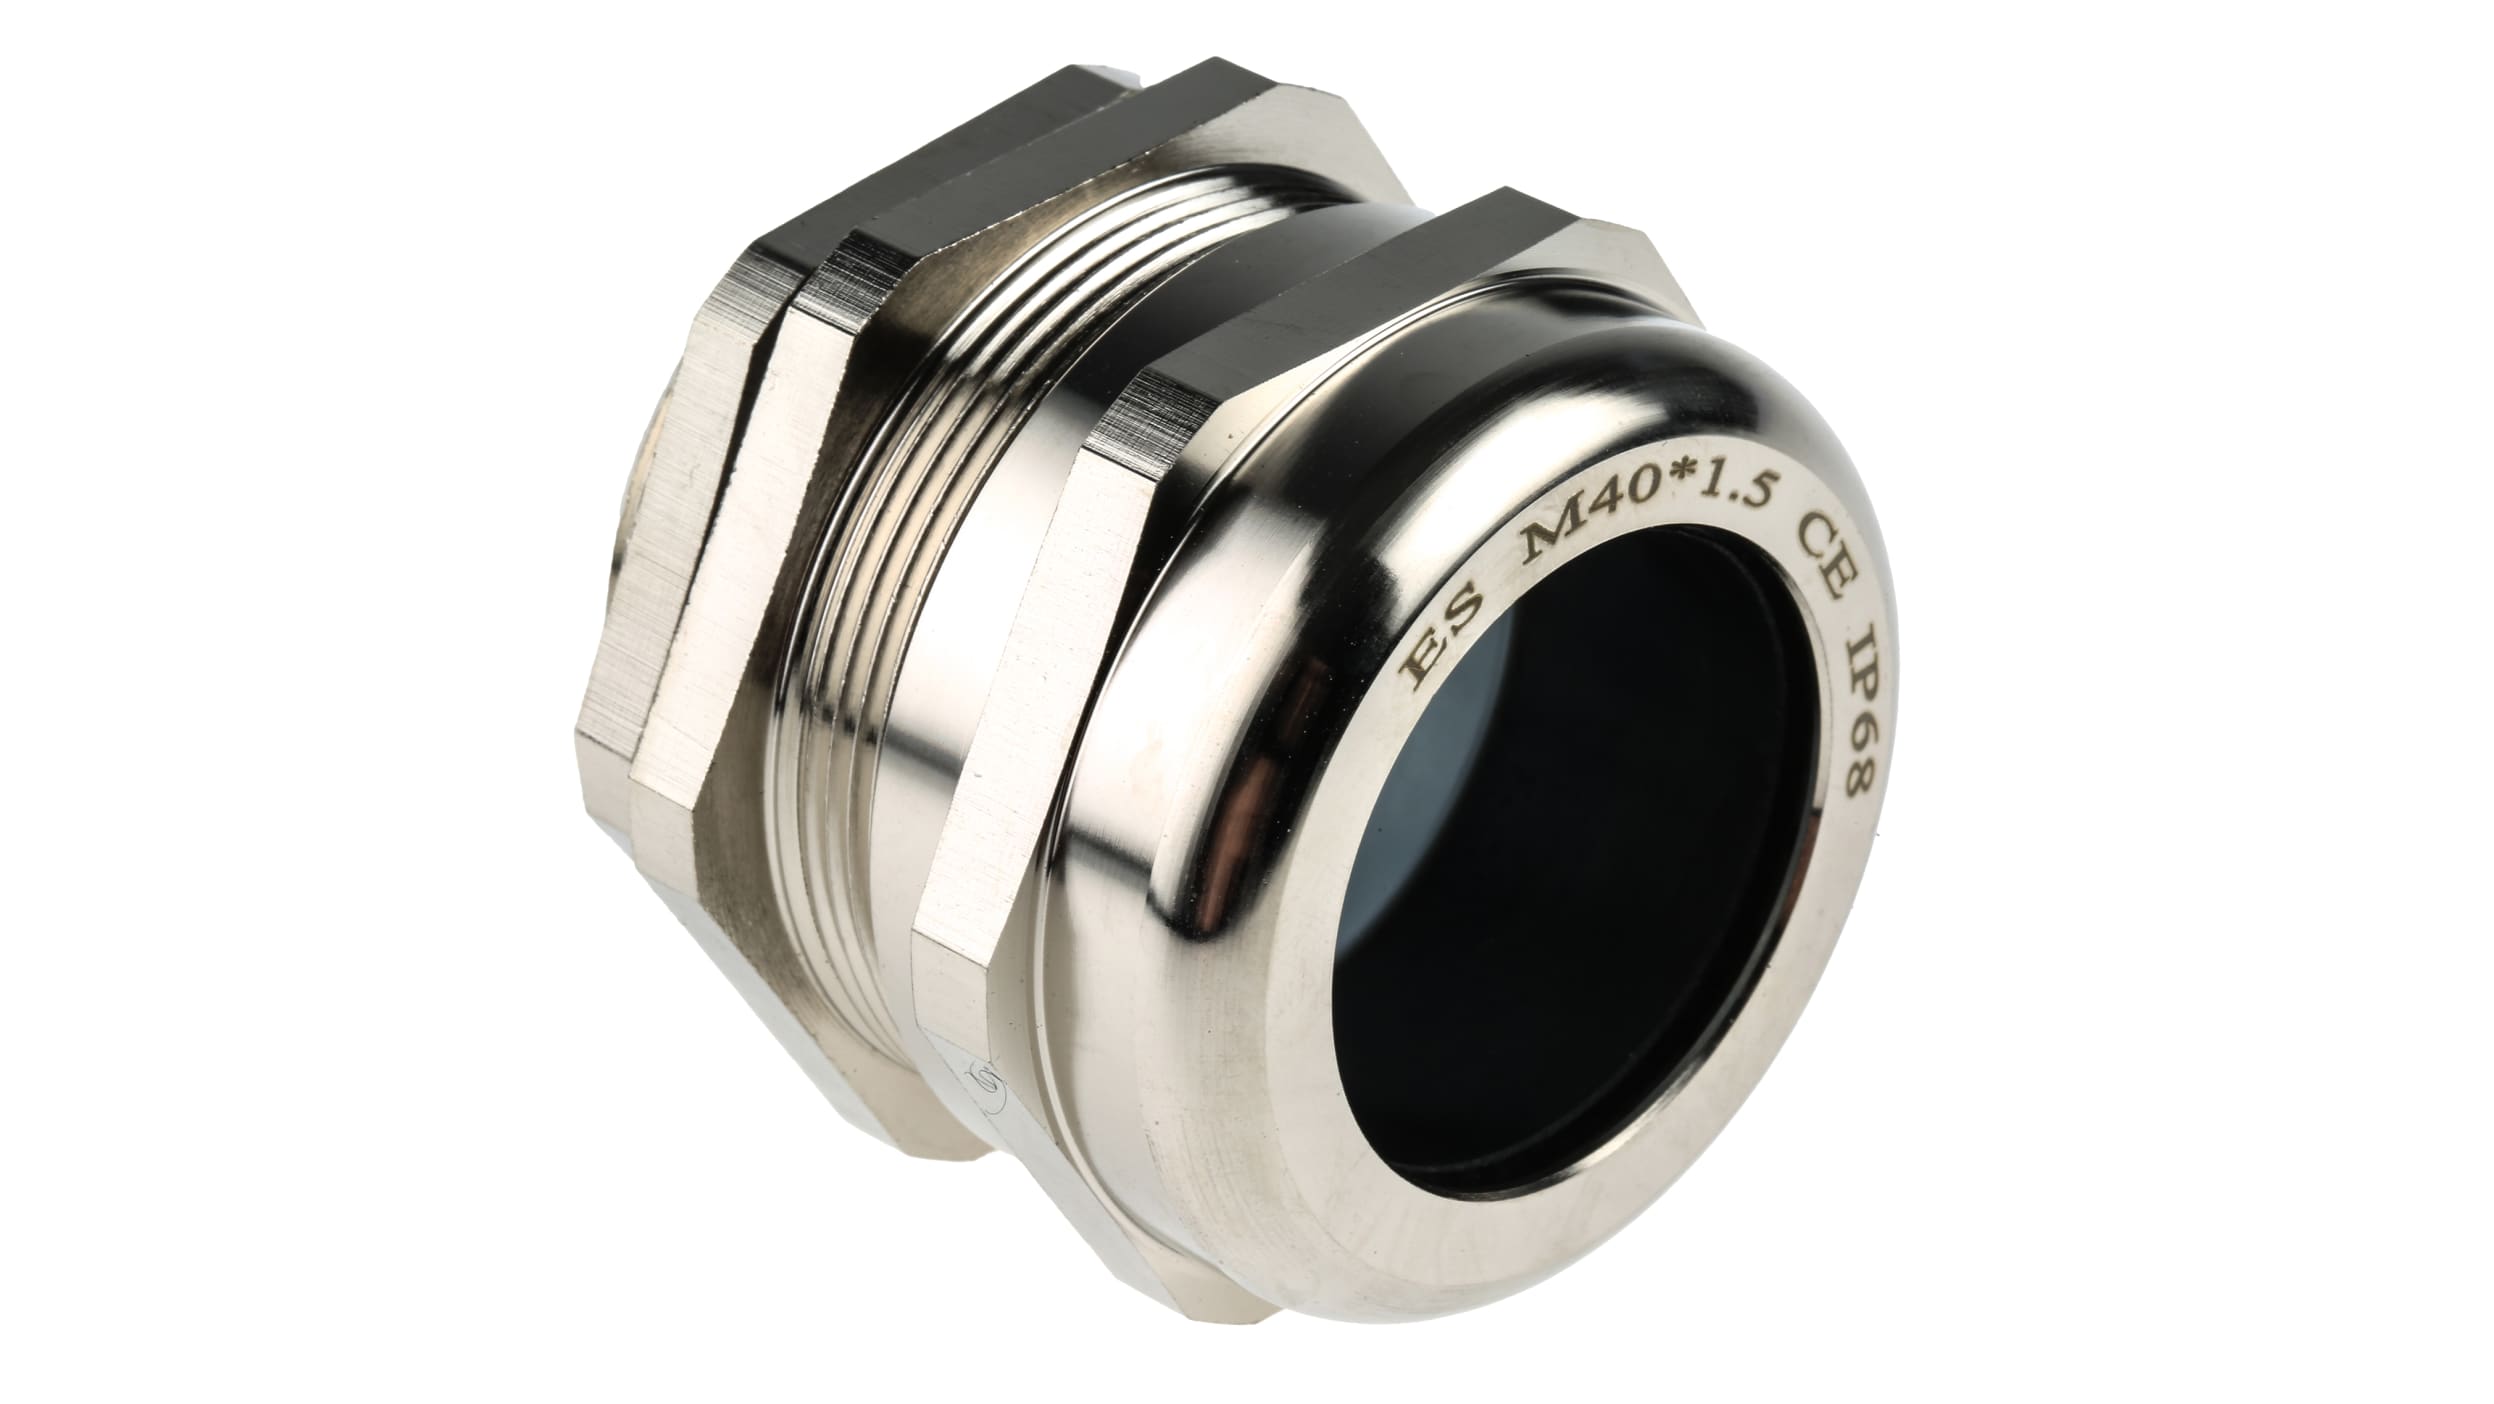 Metal Cable Gland Armoured GP 30-39.5mm M40 IP66/67 - MM Electrical  Merchandising